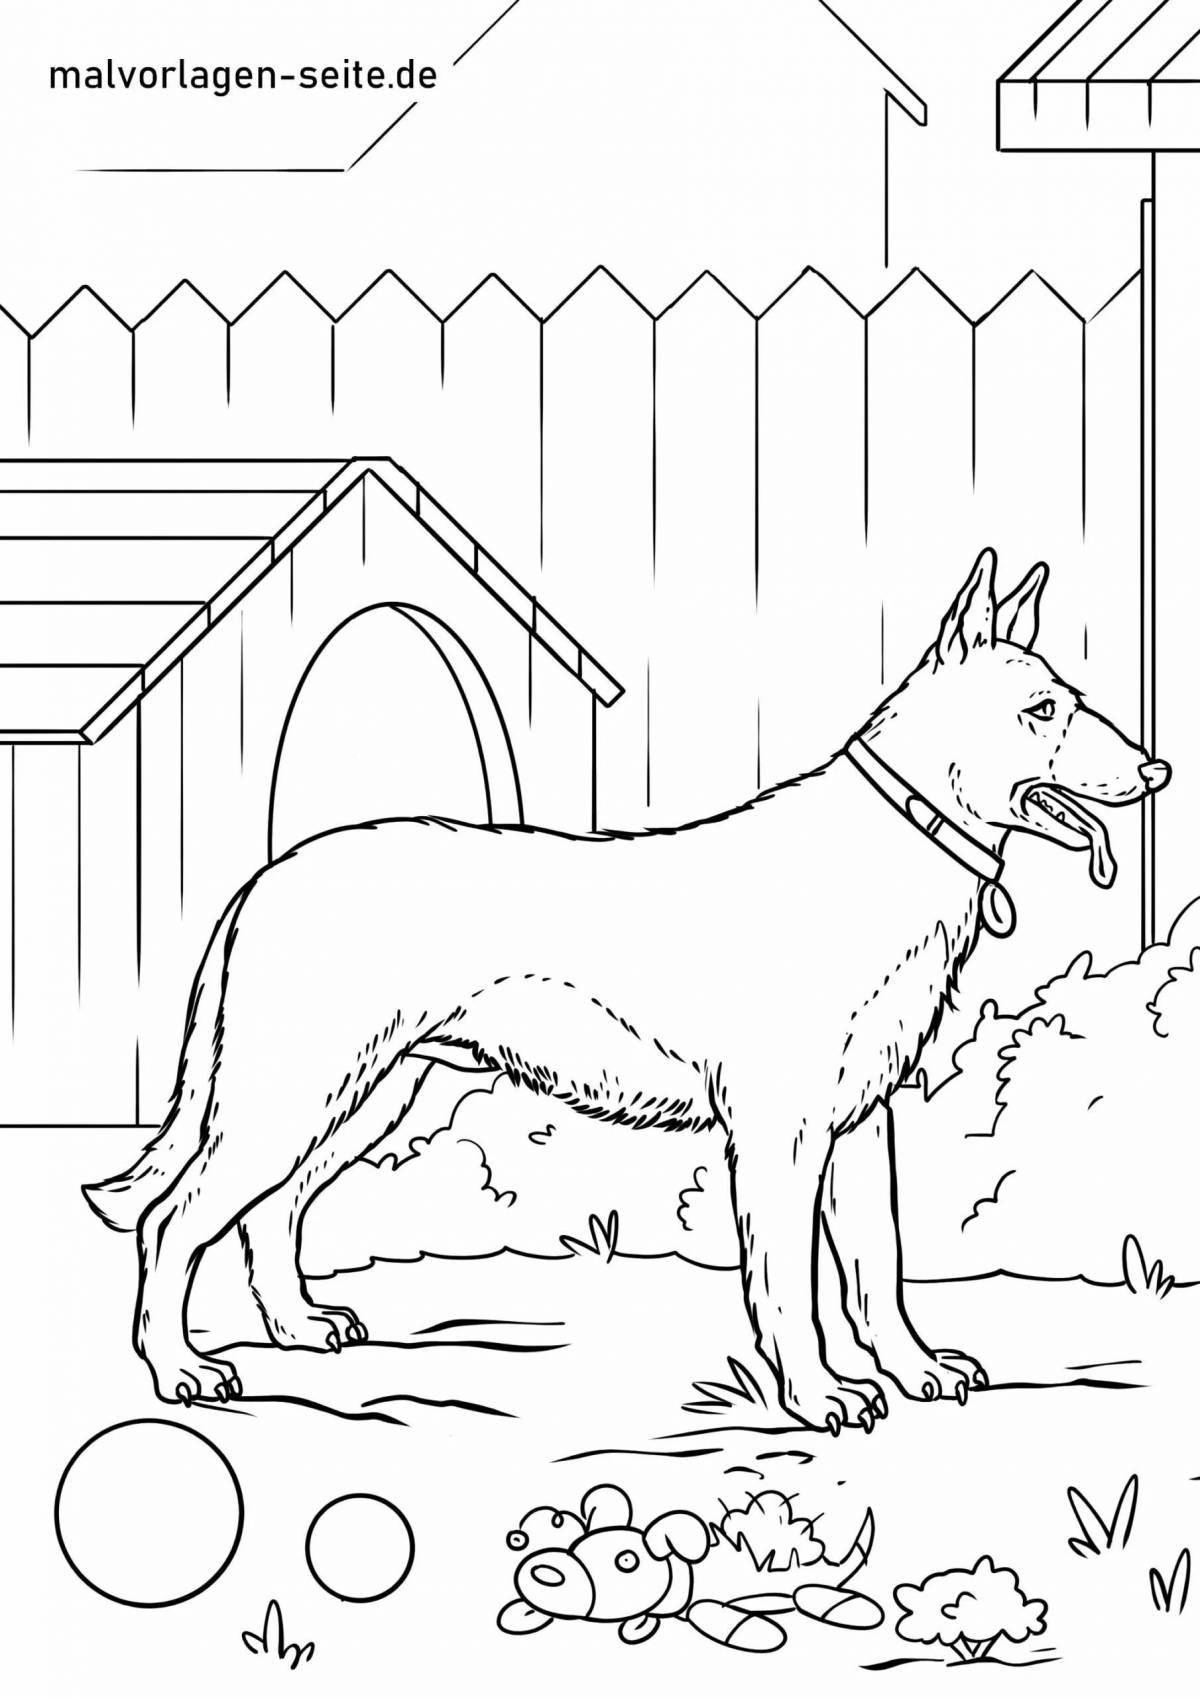 Adorable Shepherd Dog Coloring Page for Children